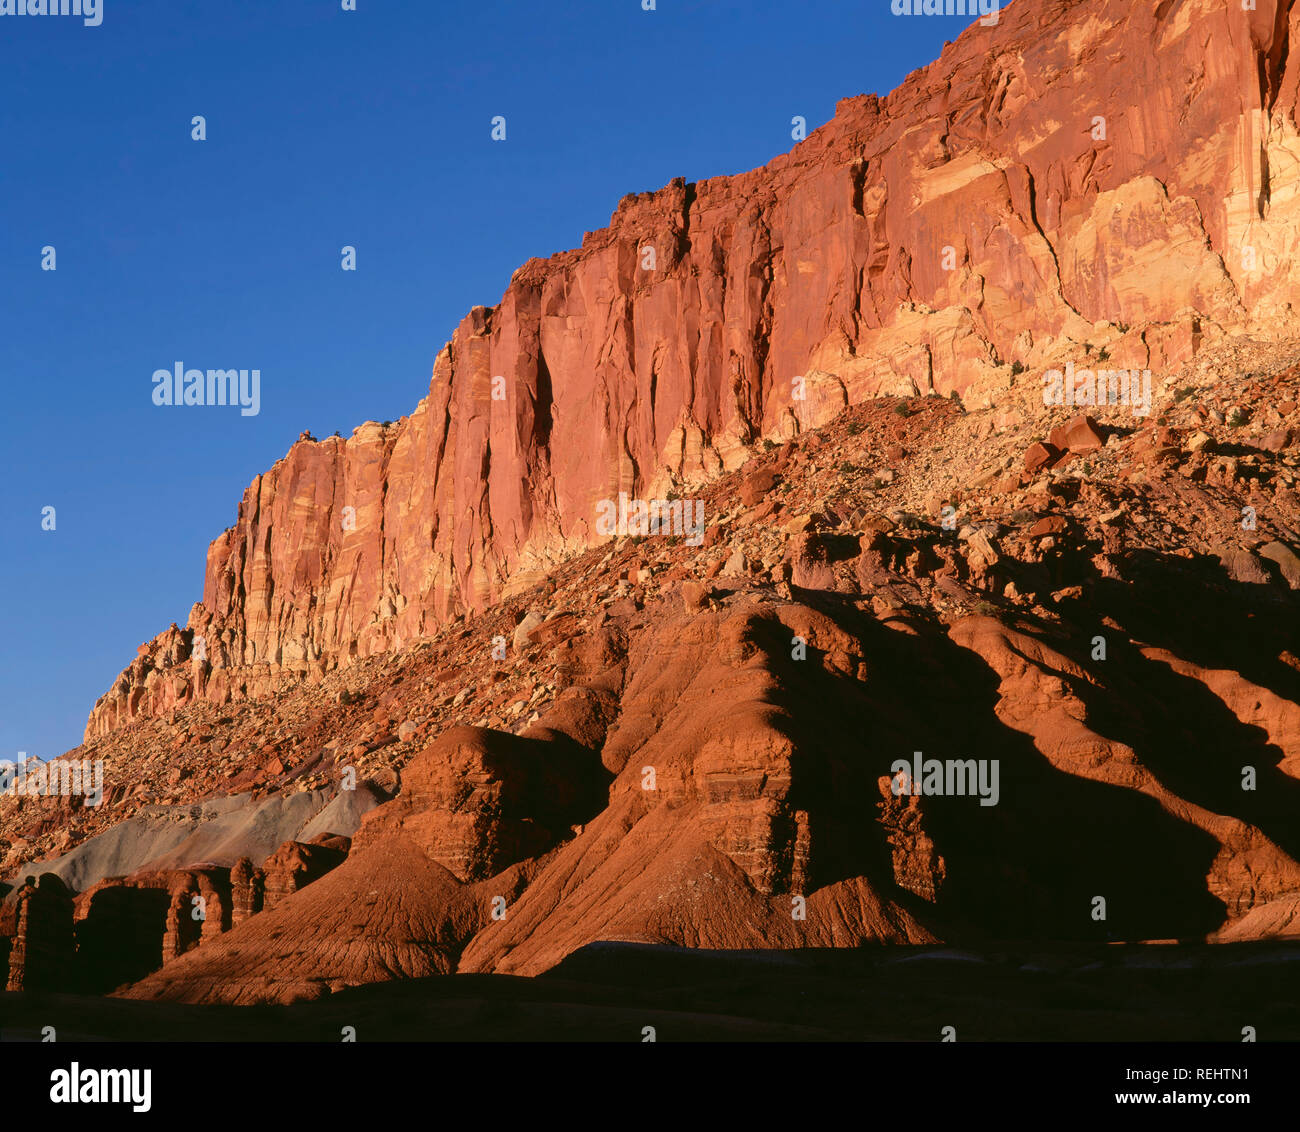 USA, Utah, Capitol Reef National Park, Rugged cliffs form the western face of the Waterpocket Fold near Grand Wash. Stock Photo